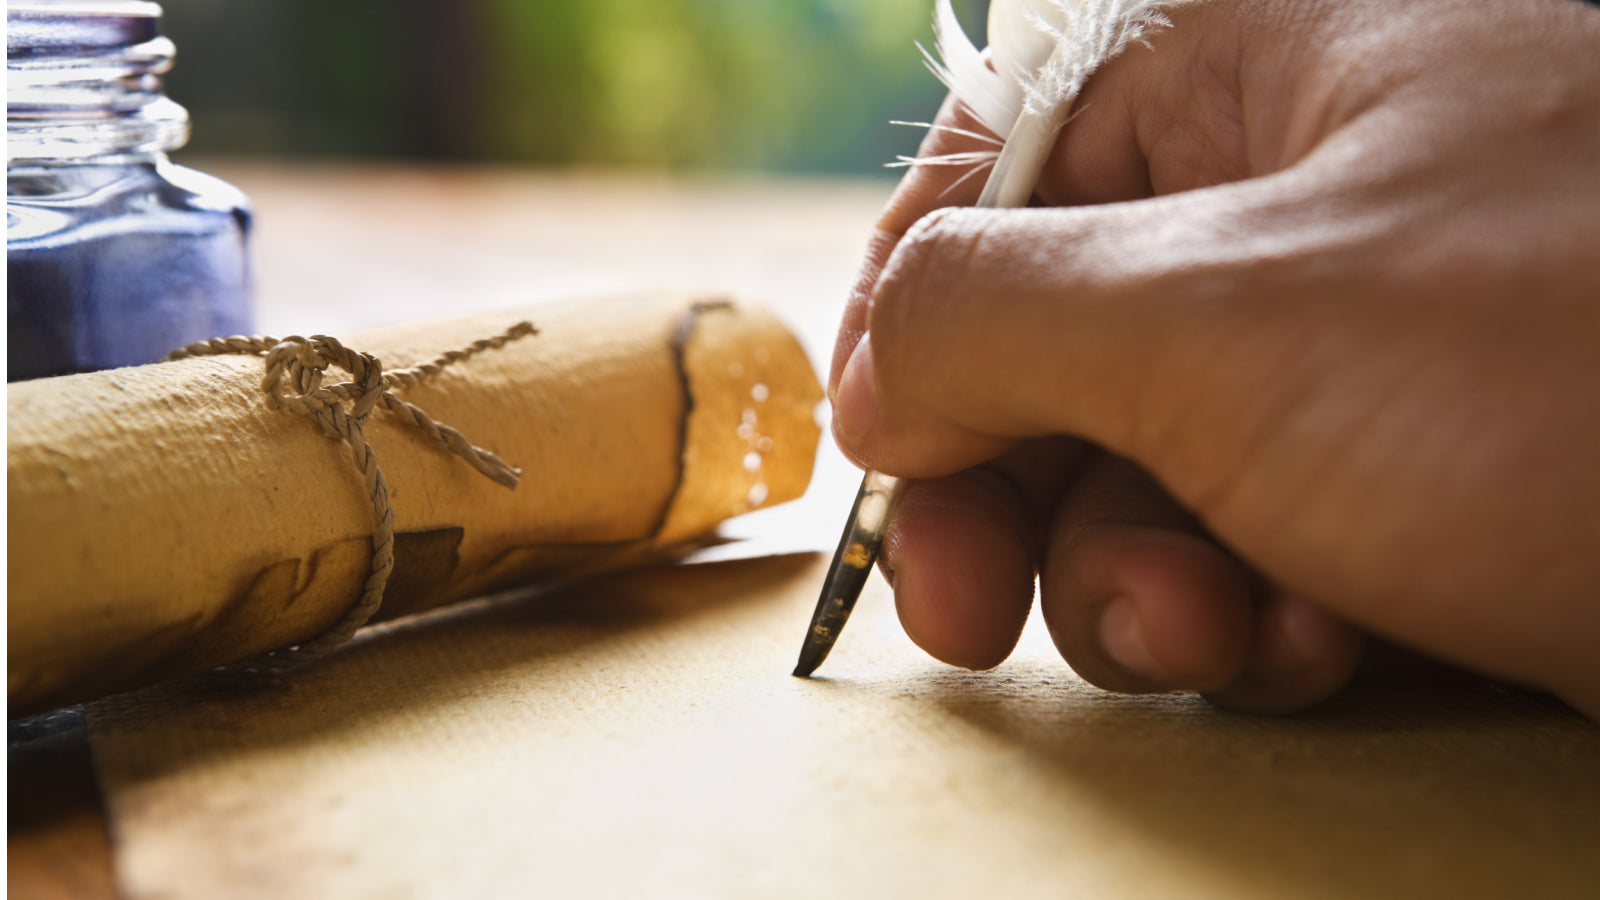 A hand writing with a quill pen with a paper roll and ink well behind